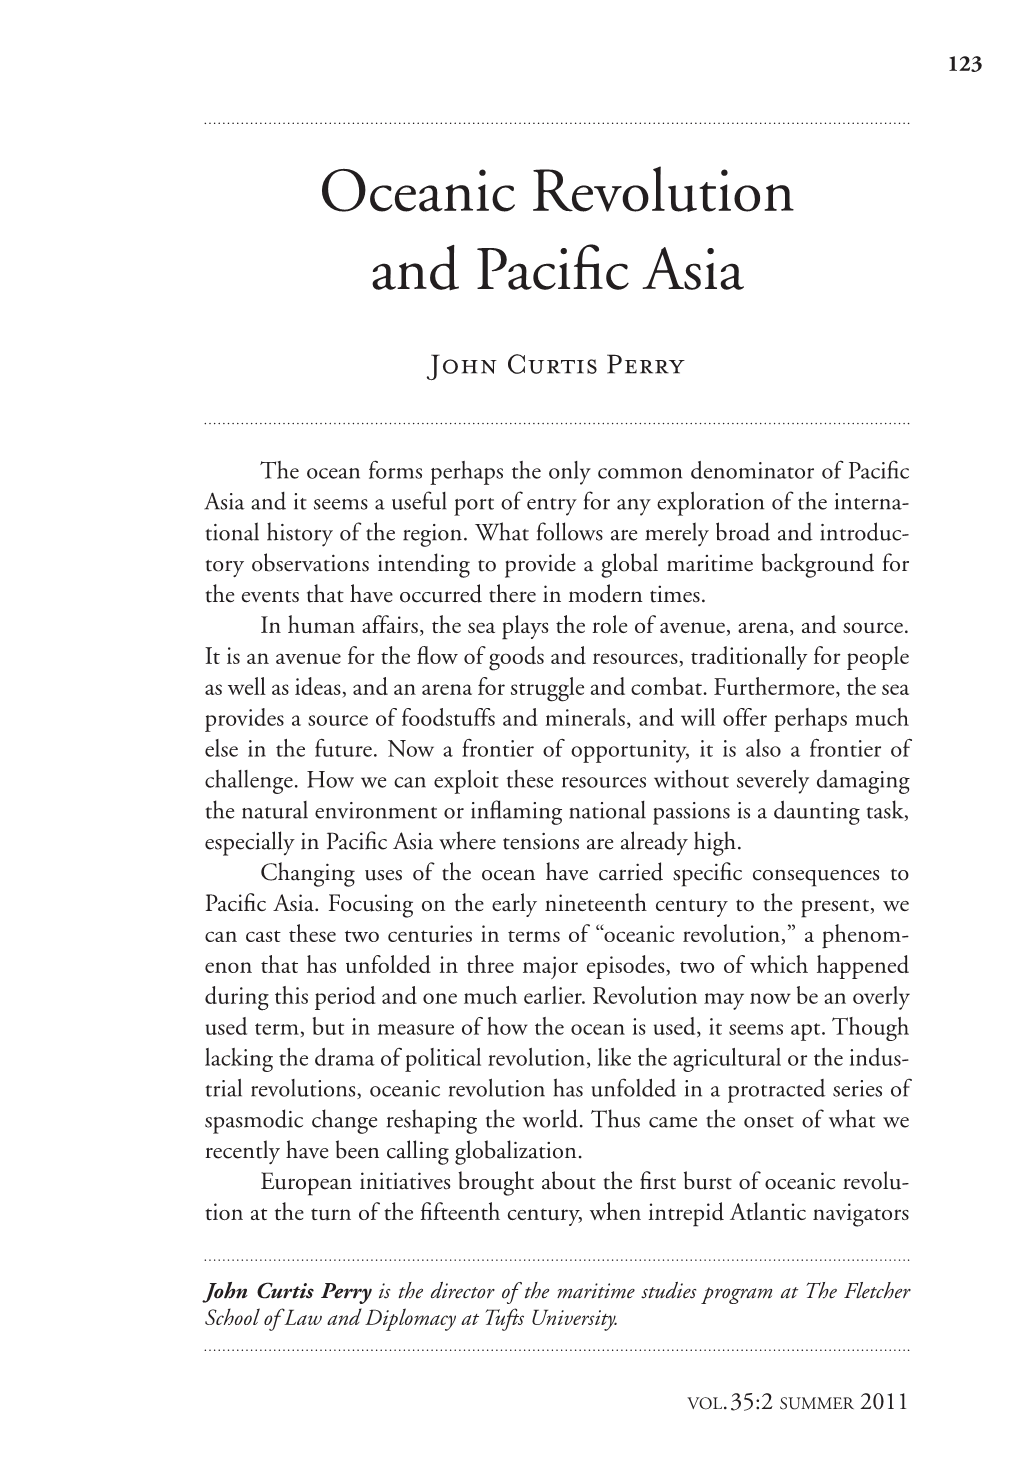 Oceanic Revolution and Pacific Asia